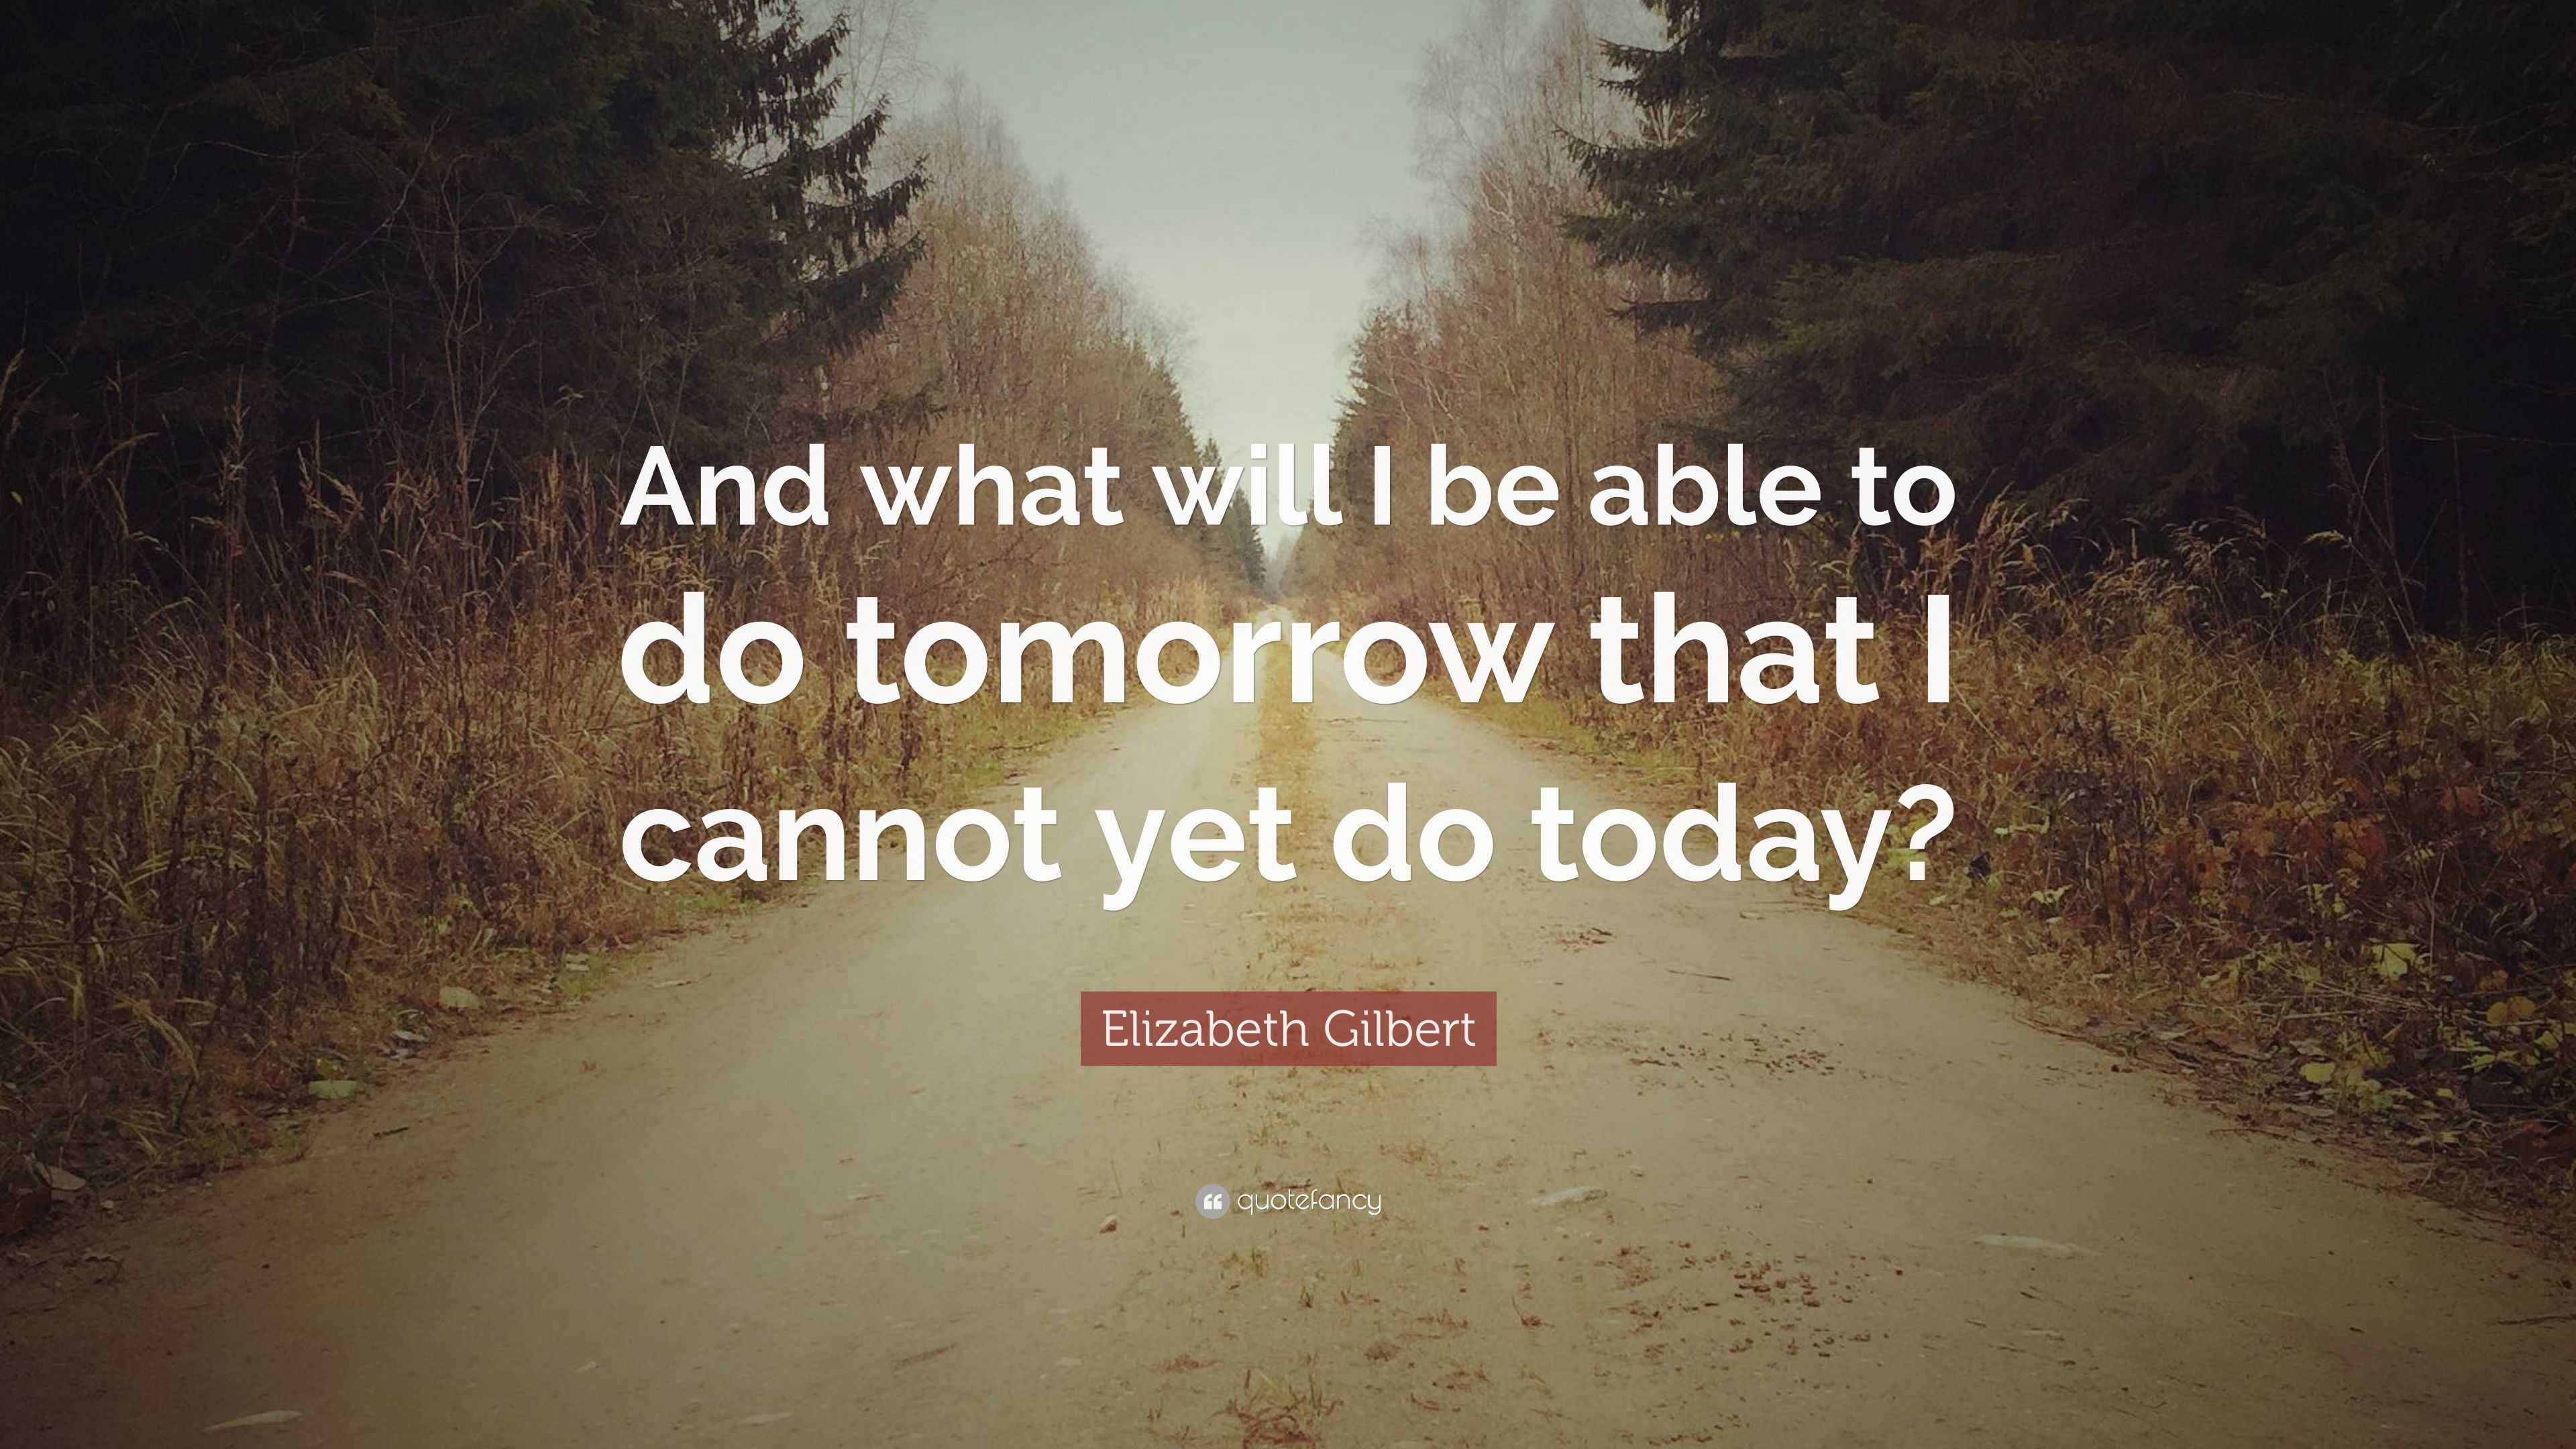 Elizabeth Gilbert Quote: “And what will I be able to do tomorrow that I ...